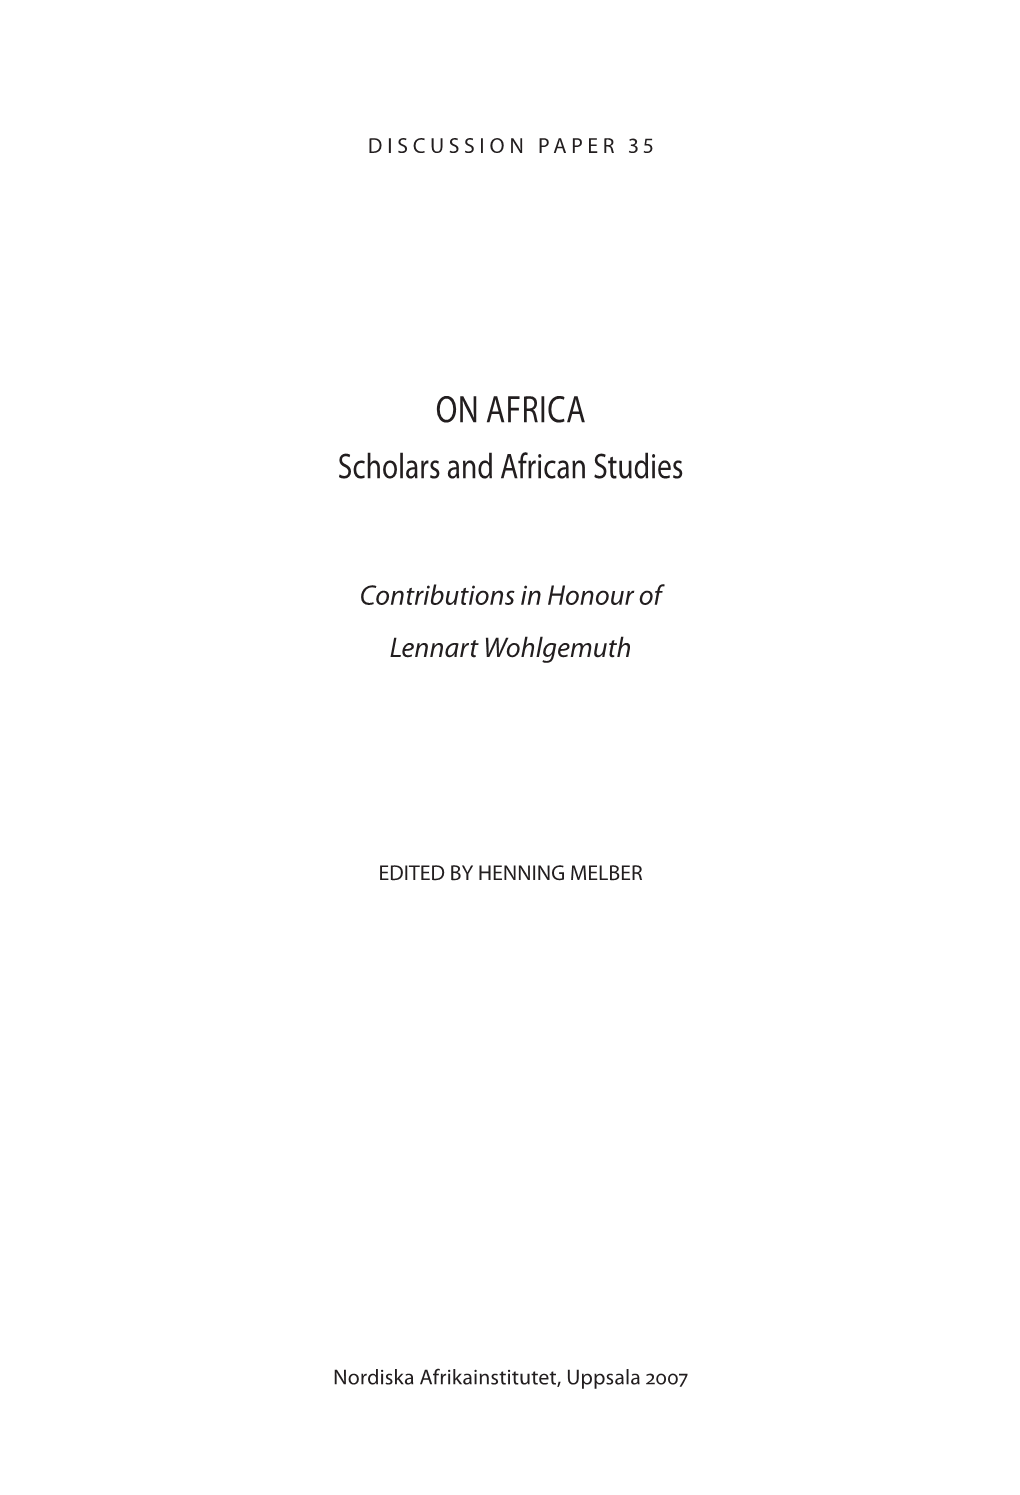 On Africa: Scholars and African Studies